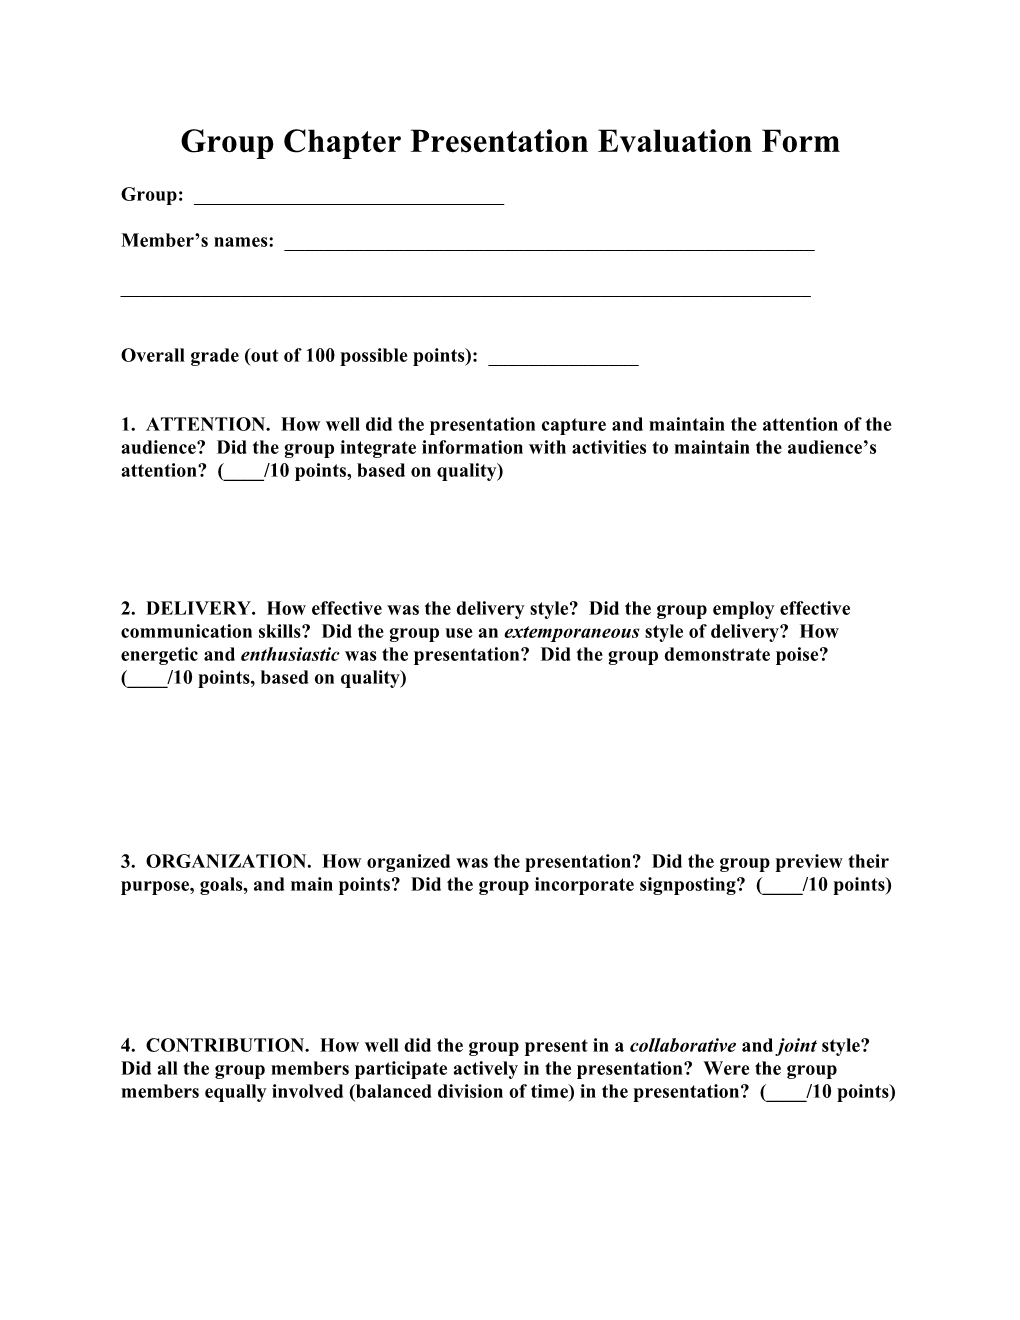 Group Fishbowl Discussion Evaluation Form